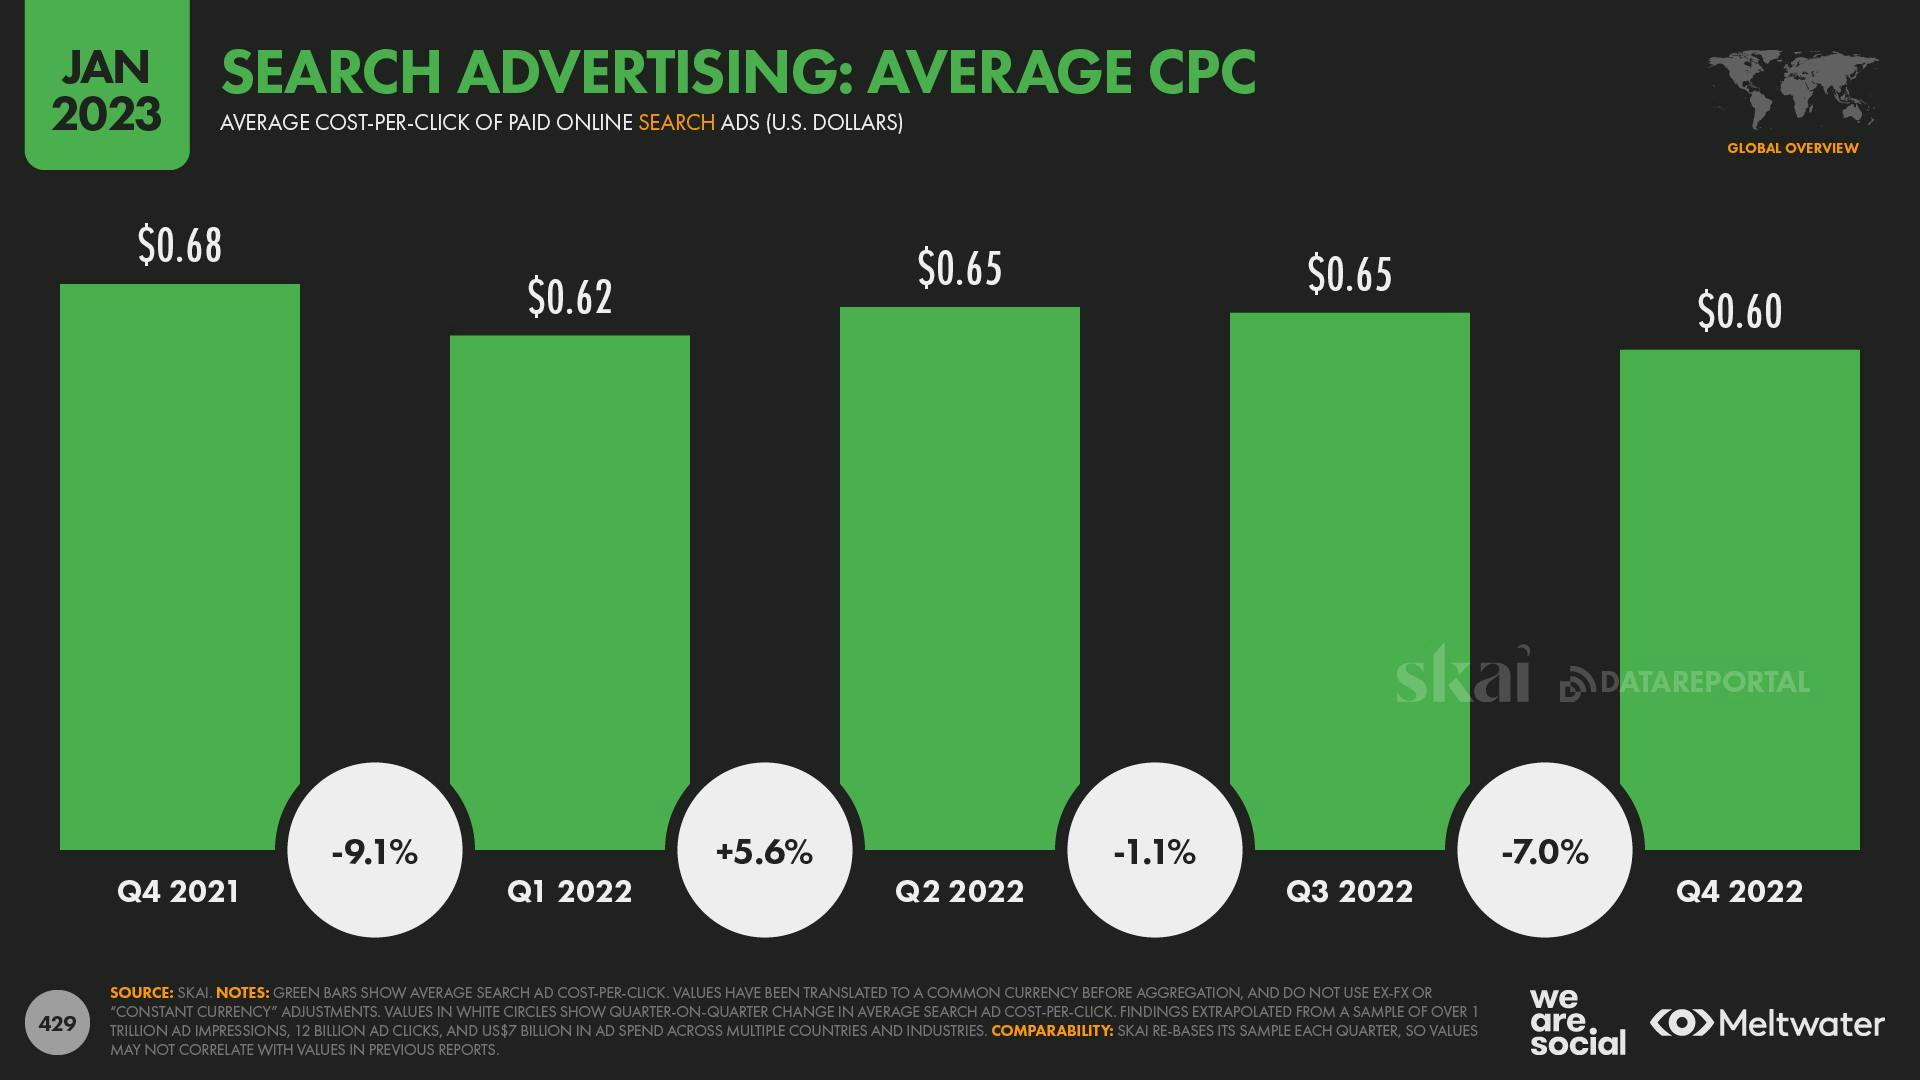 Search advertising: Average CPC 2021 - 2022